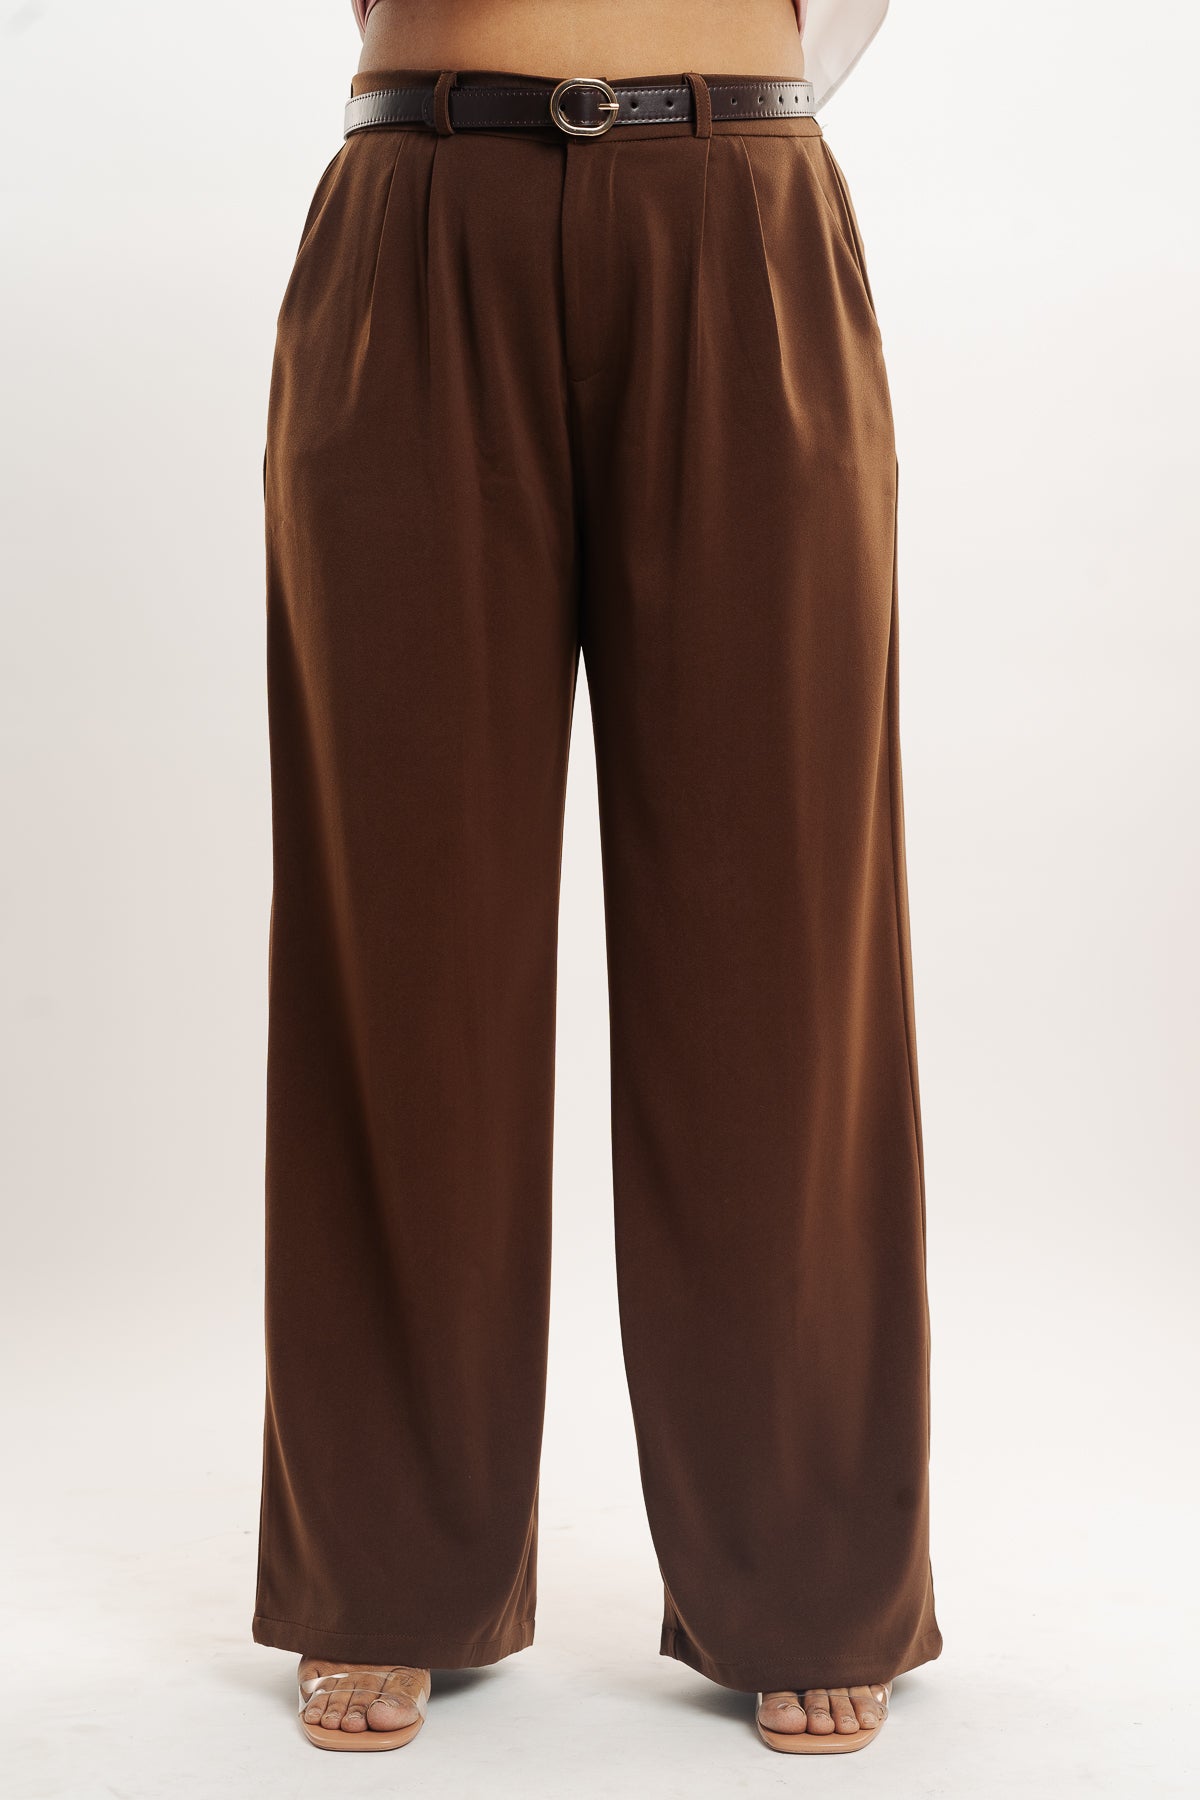 BROWN PLEATED STRAIGHT FIT CURVE KOREAN PANTS